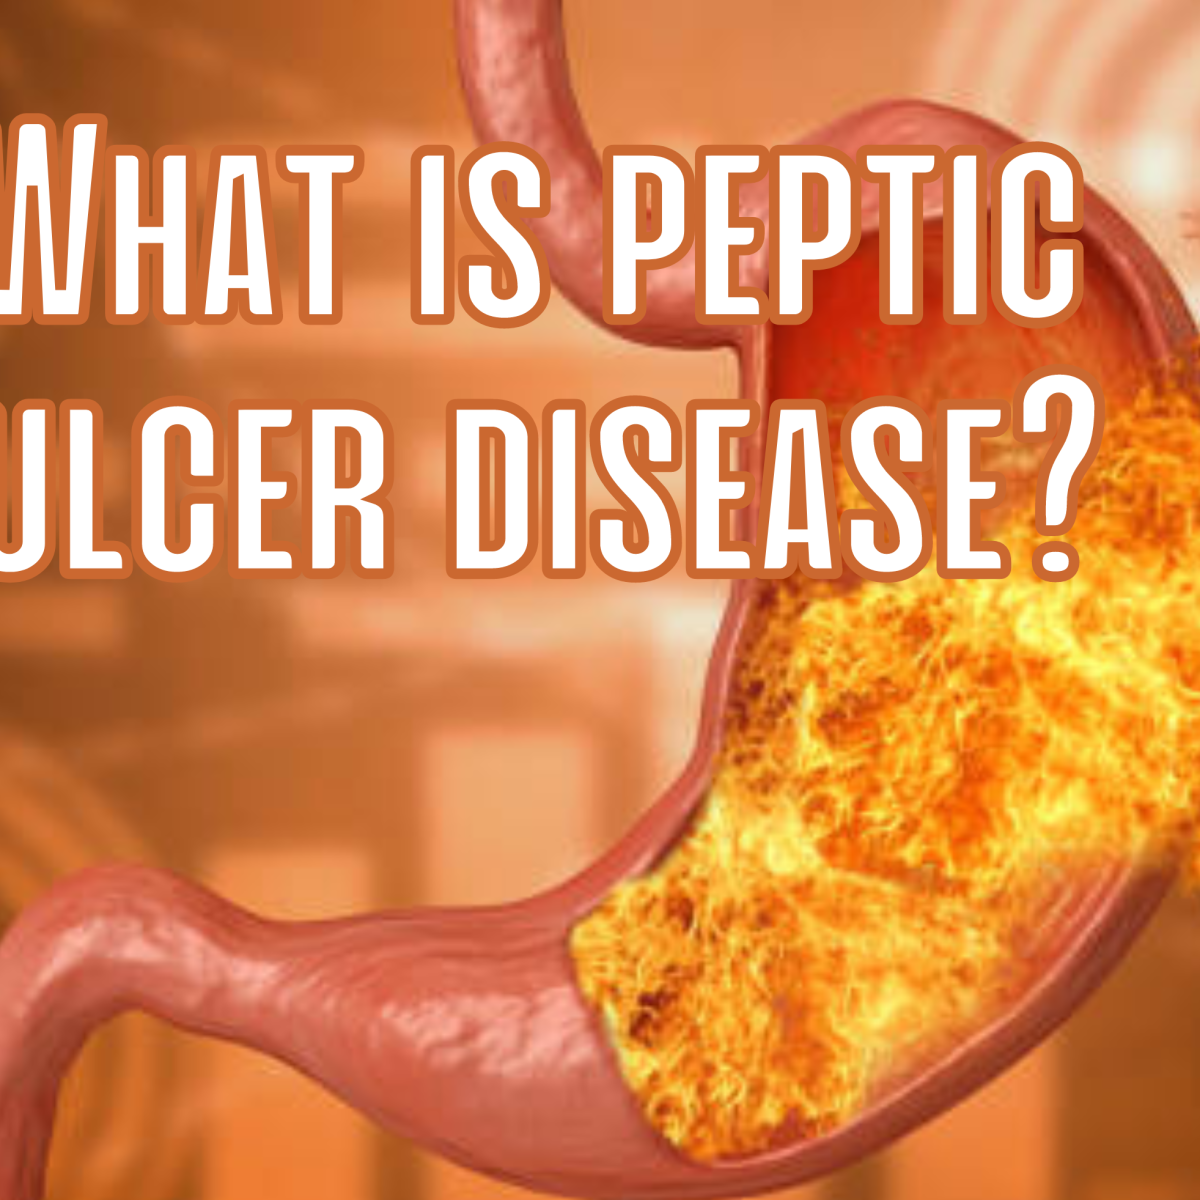 Peptic ulcer disease: Symptoms, risk factors, clinical diagnosis, and treatment